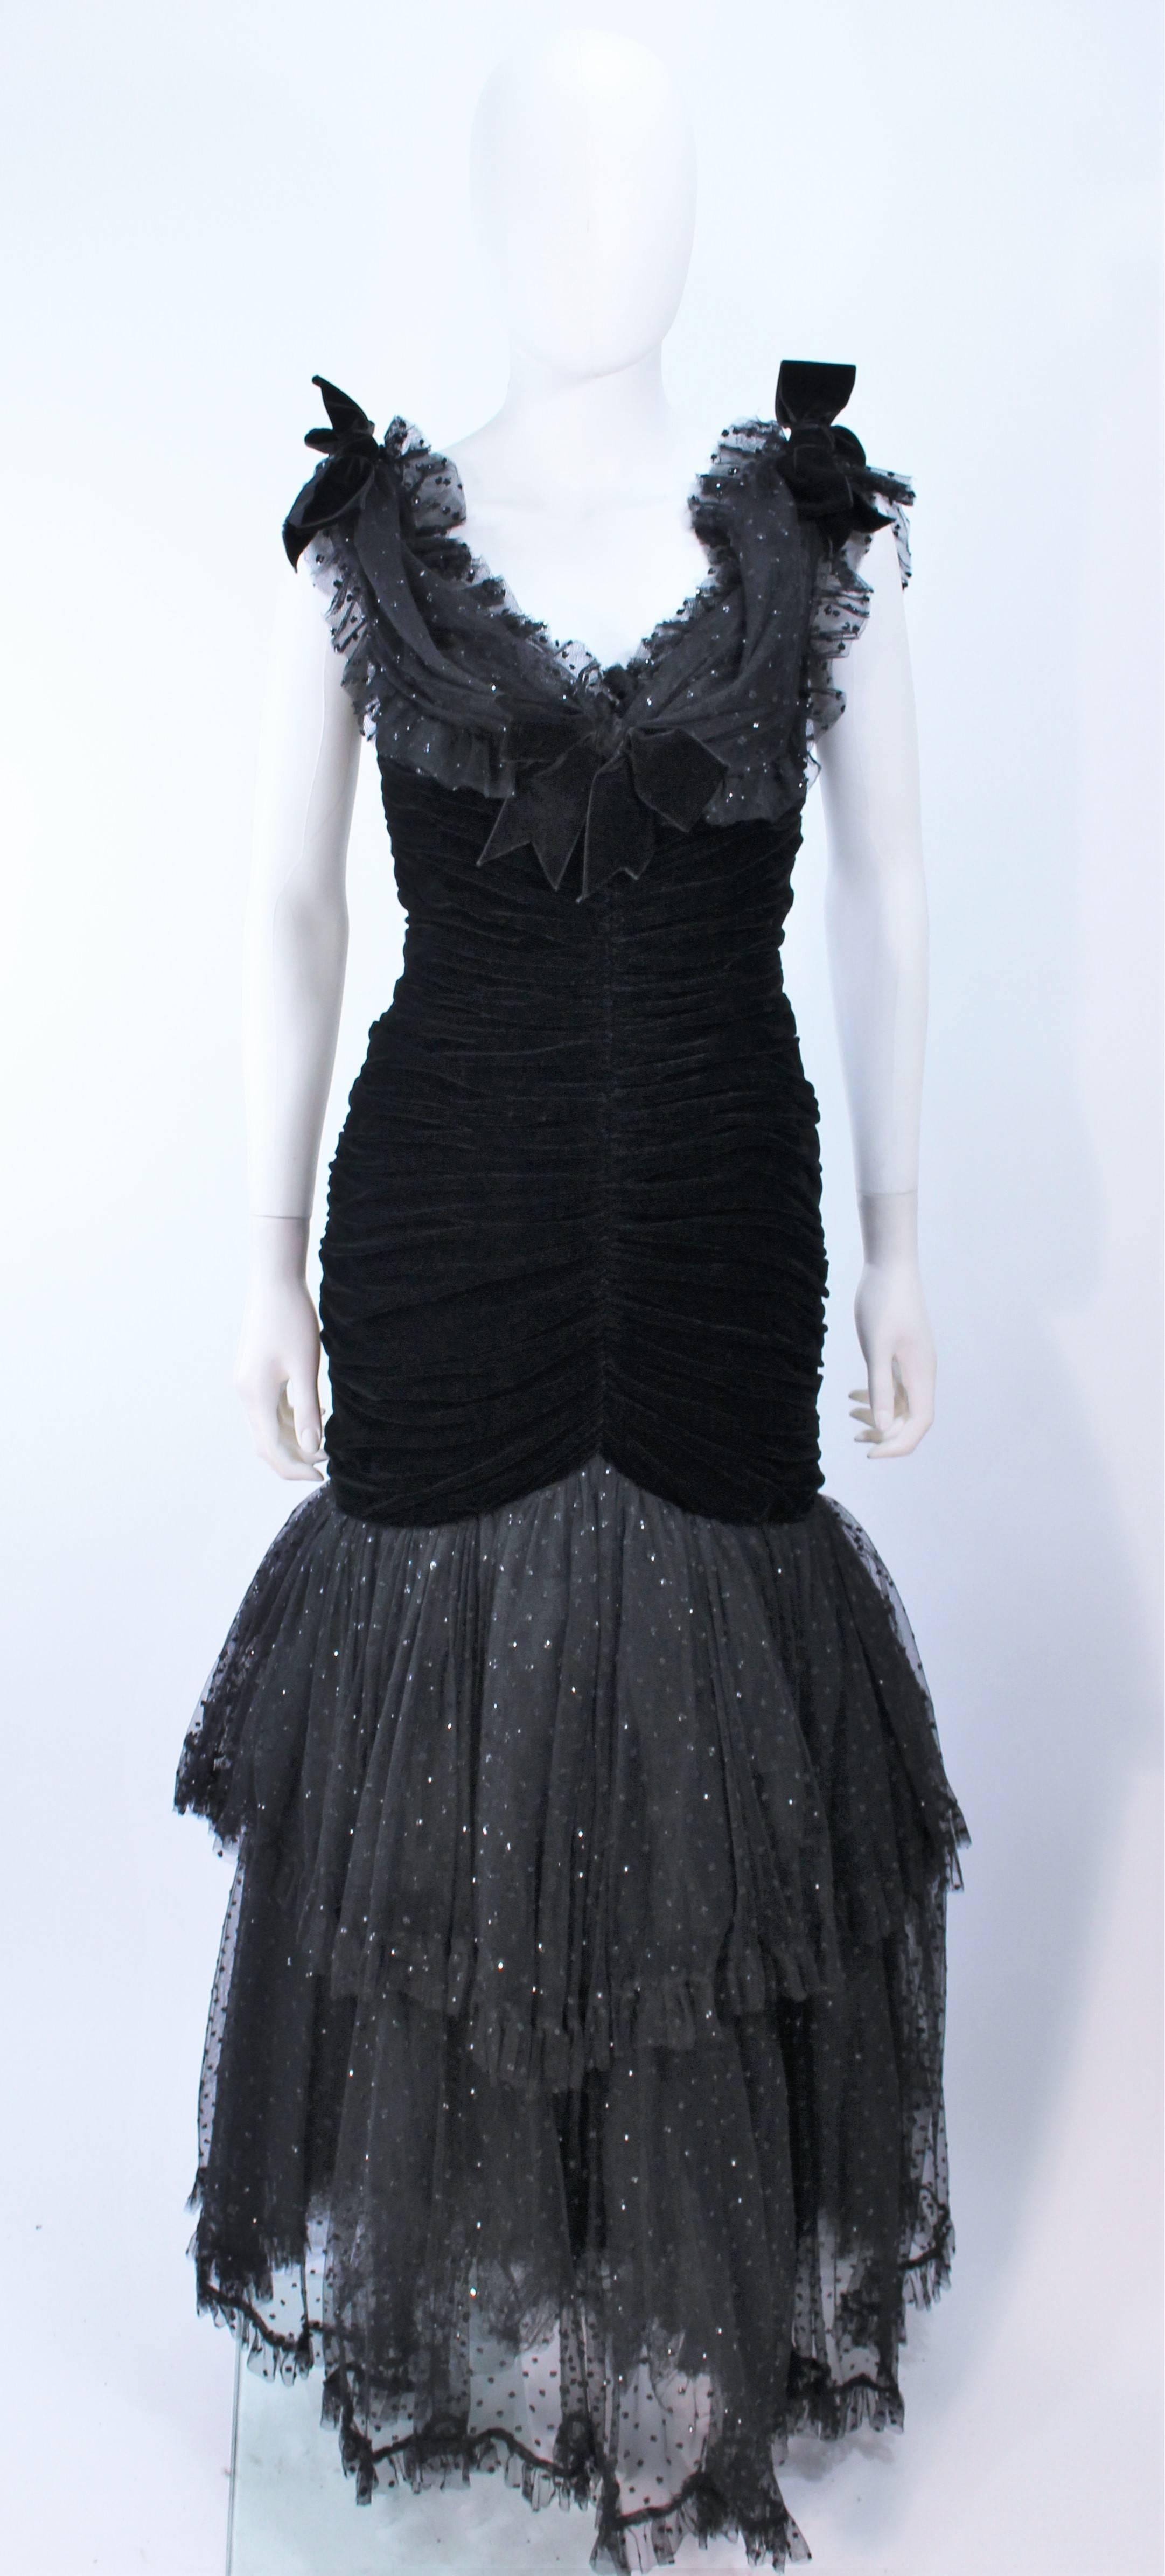 This Belville Sasson gown is composed of a black velvet with lace, and mesh accenting. Features a ruched style with center back zipper closure. Can be worn on and off the shoulders. Boned interior. In excellent vintage condition.

**Please